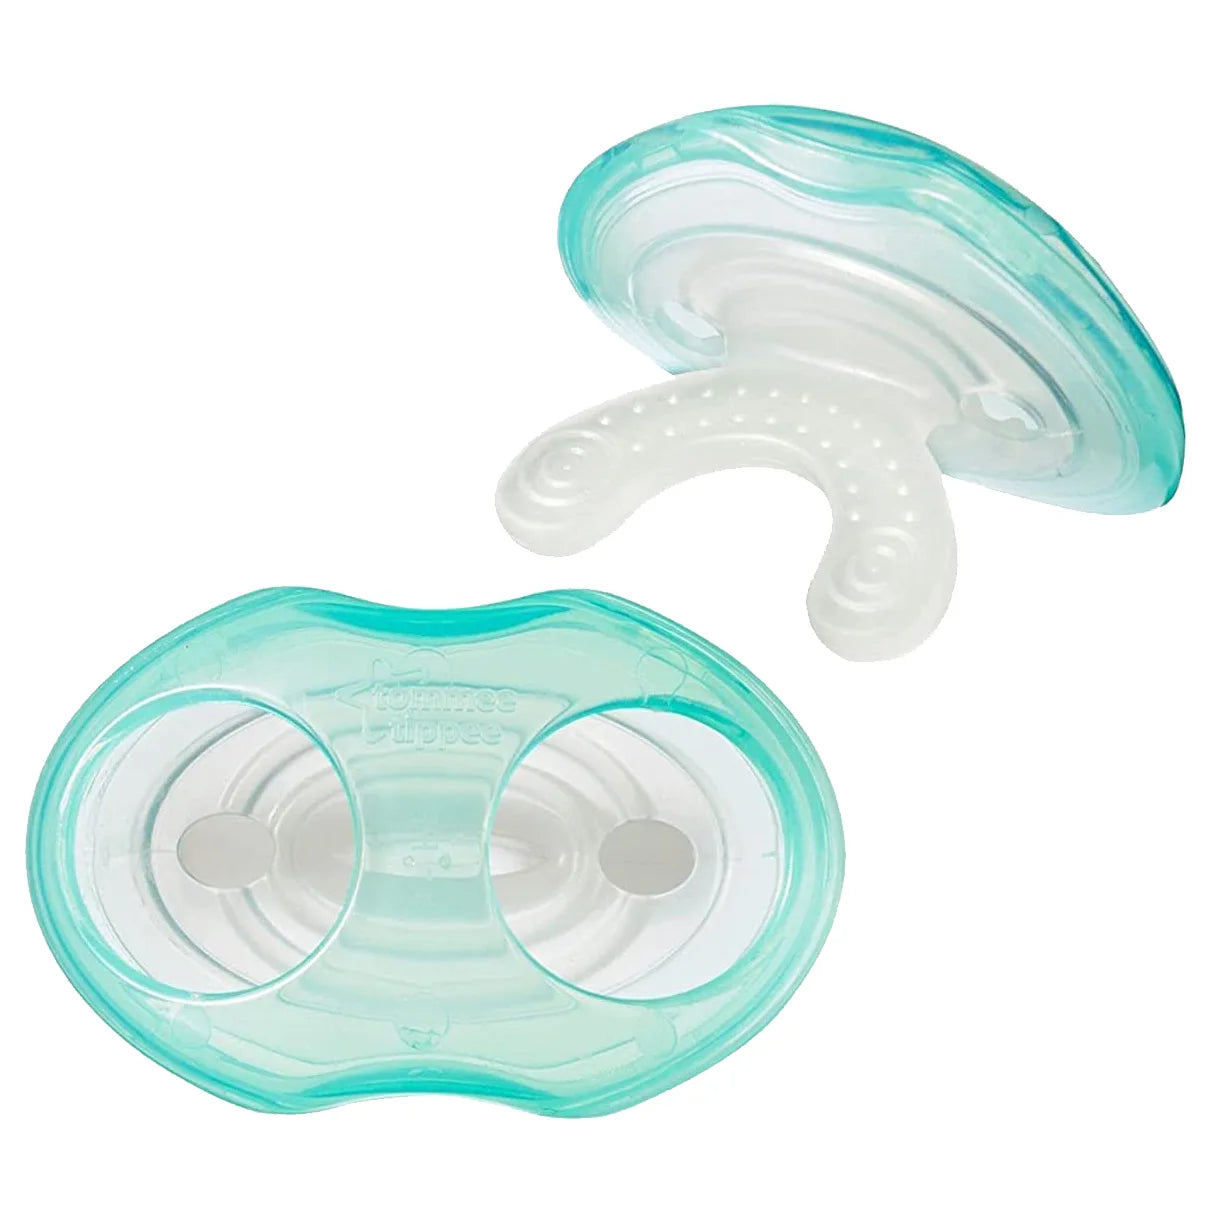 Tommee Tippee Closer to Nature Teether Stage1 - 3m+ Pack of 2 (Green)